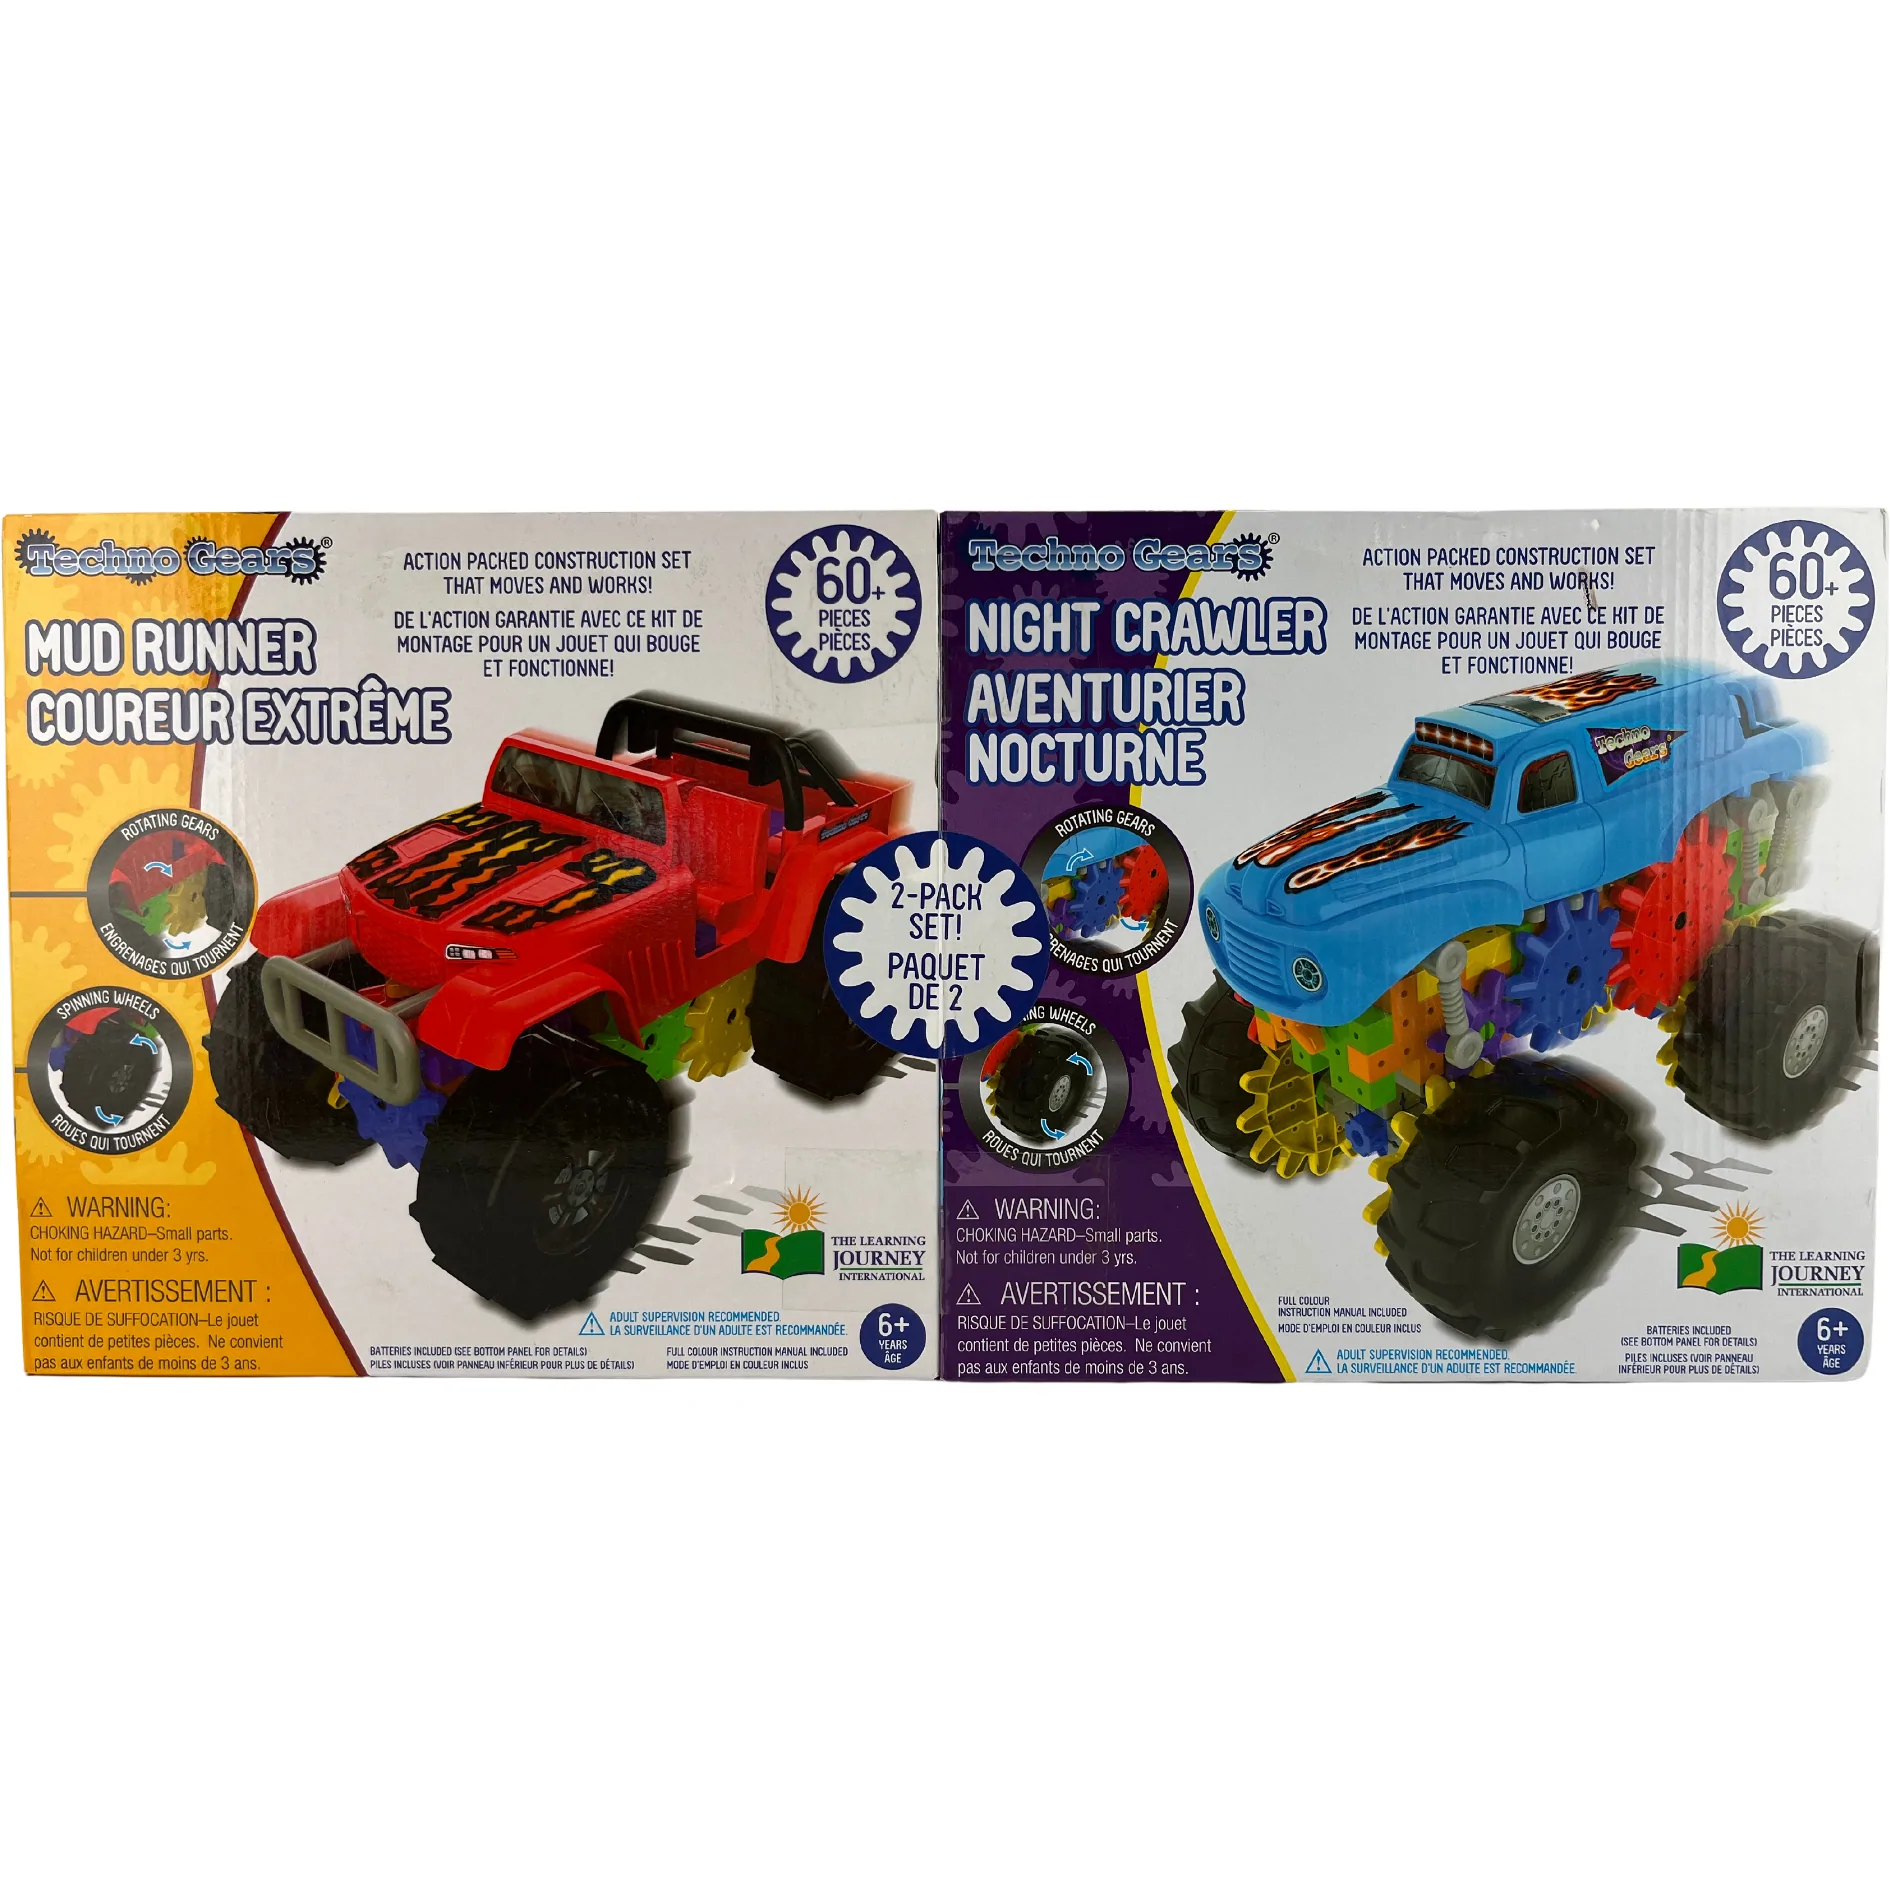 Techno Gears Building Set / Building with Gears / 2 Pack / Kid's Building Set